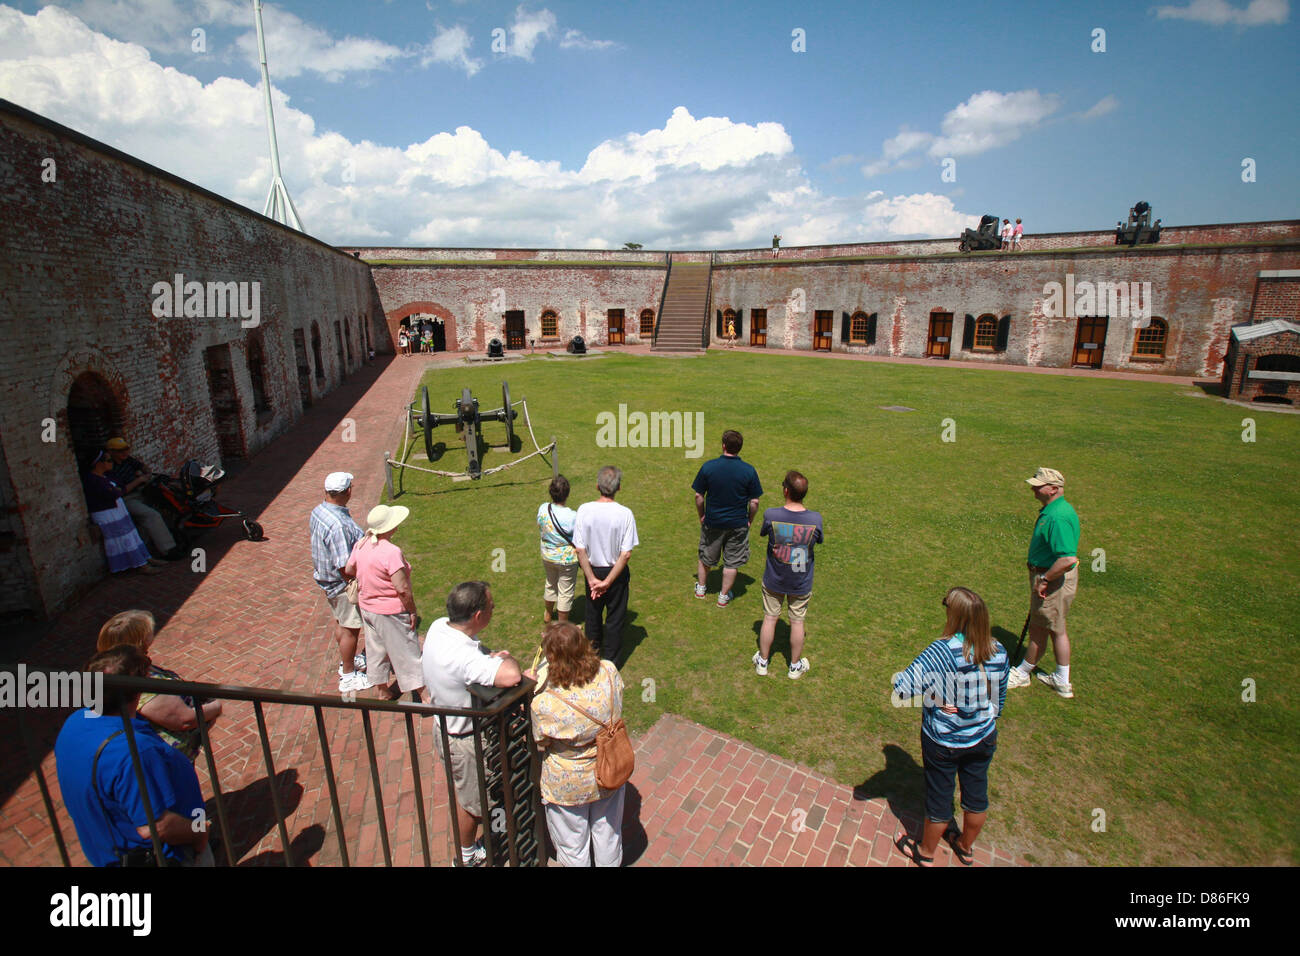 Tourists view Fort Macon State Park May 12, 2013 in Atlantic Beach, NC. Fort Macon was constructed after the War of 1812 to defend Beaufort Harbor. Stock Photo